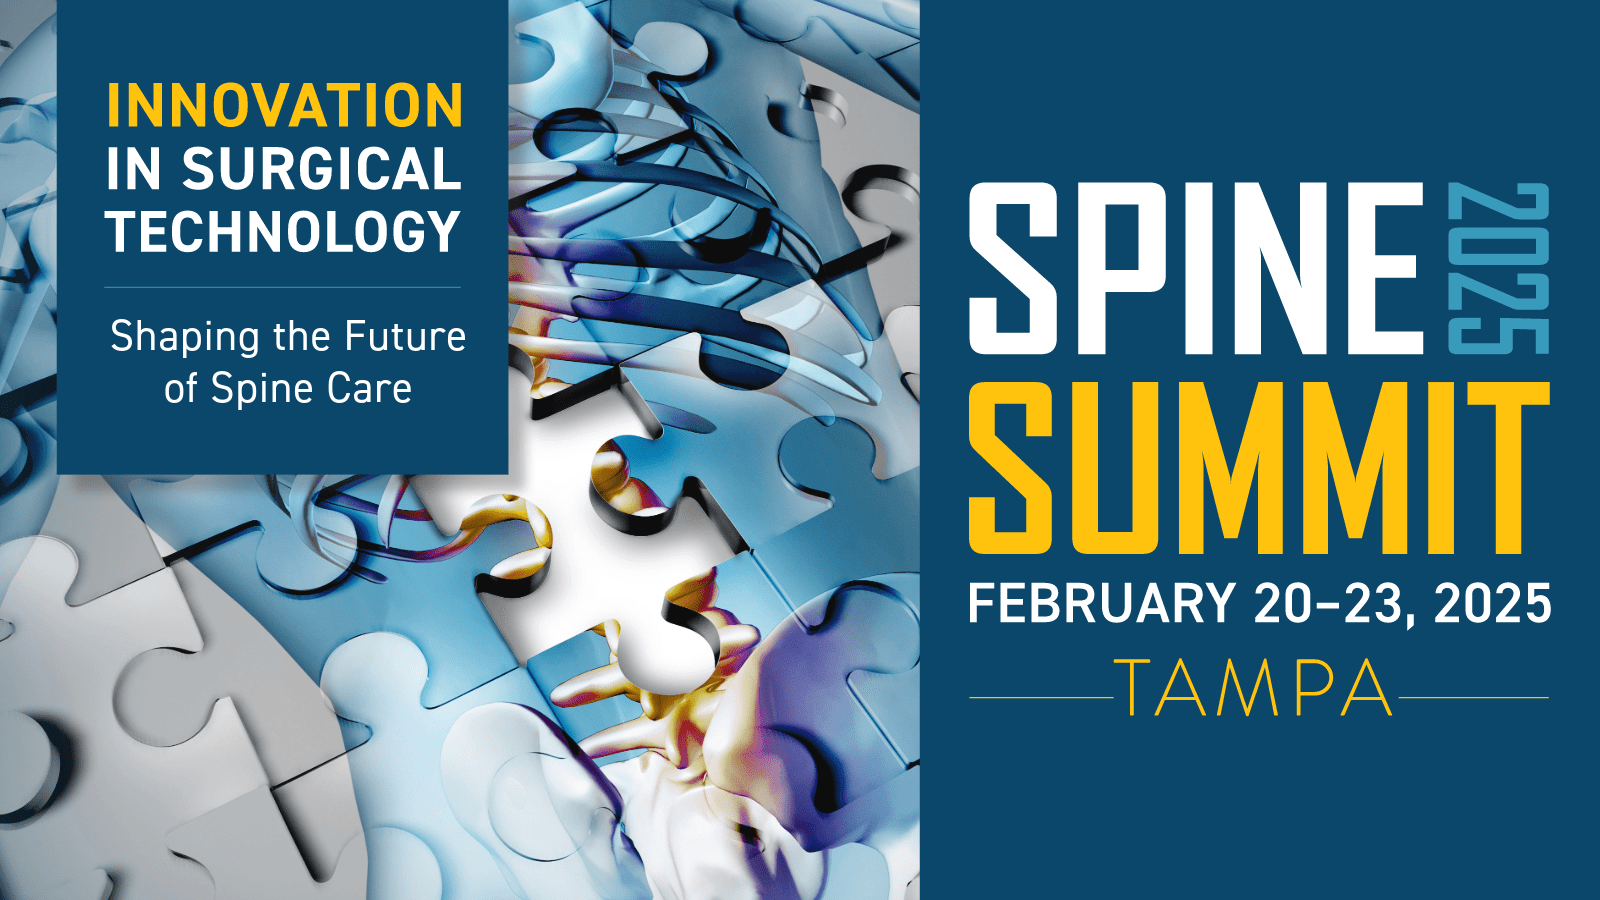 Save the Date --Spine Summit 2025 - Tampa, Florida